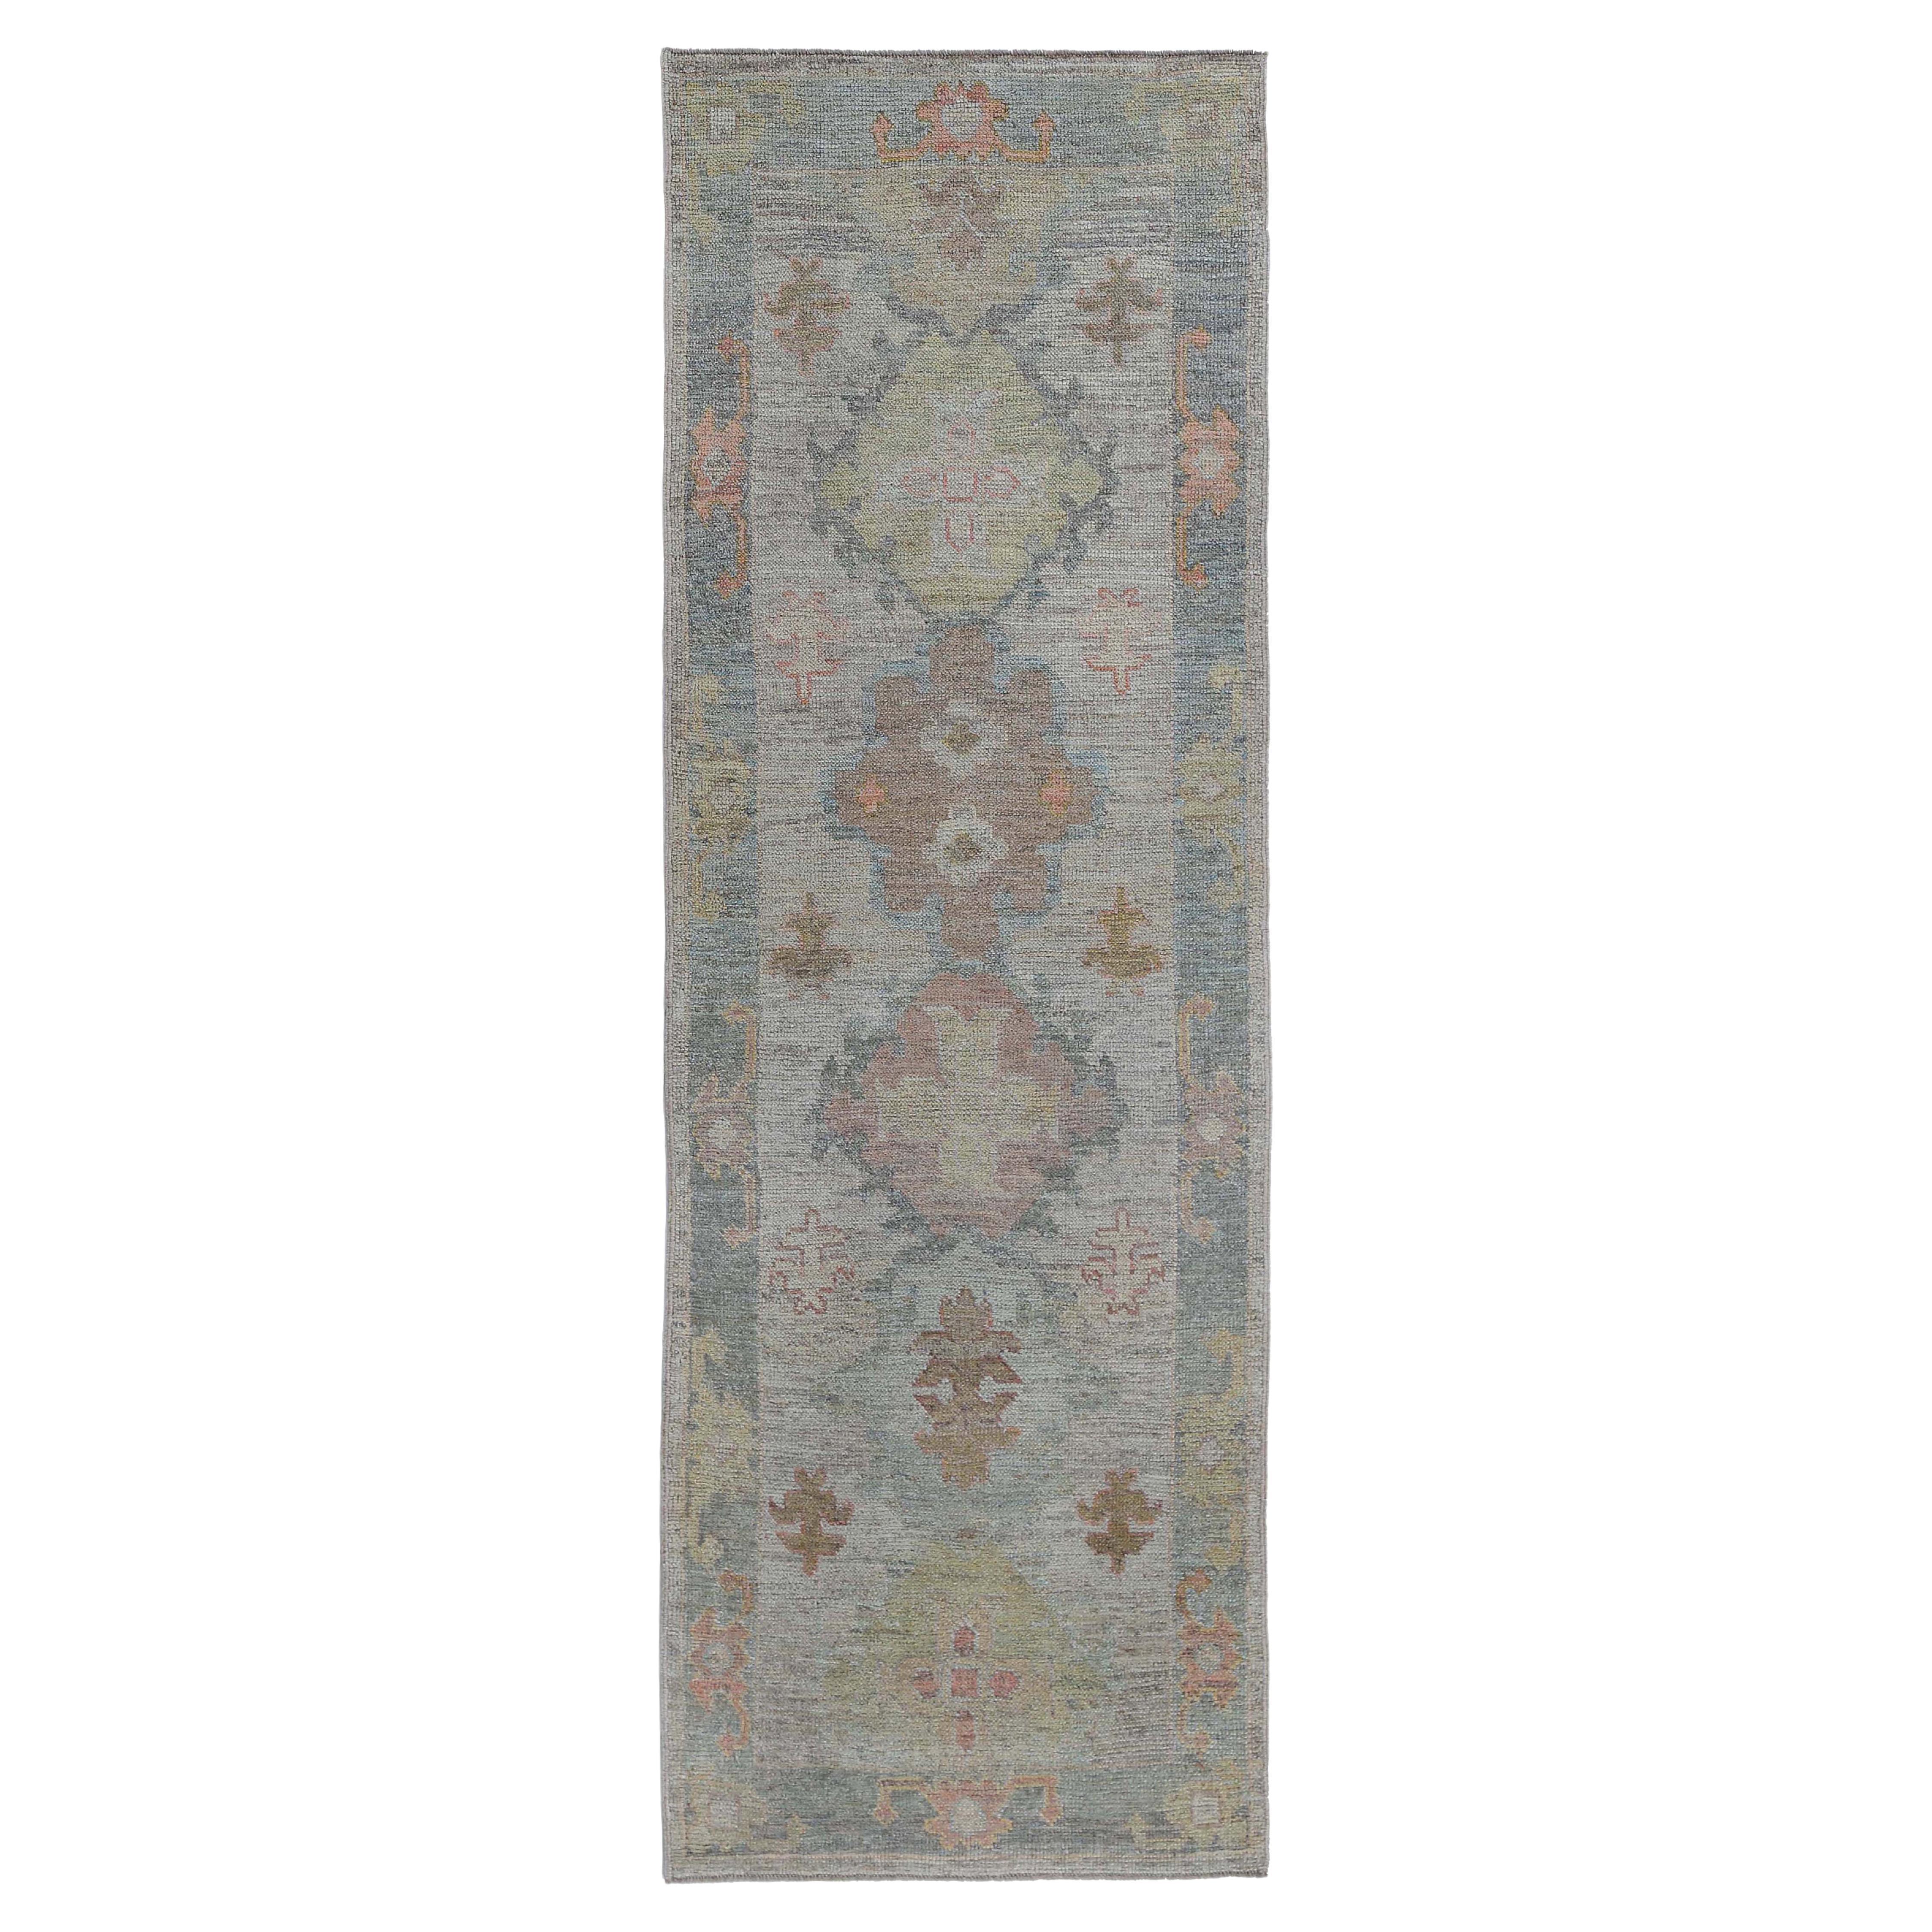 Turkish Runner with Soft Colors